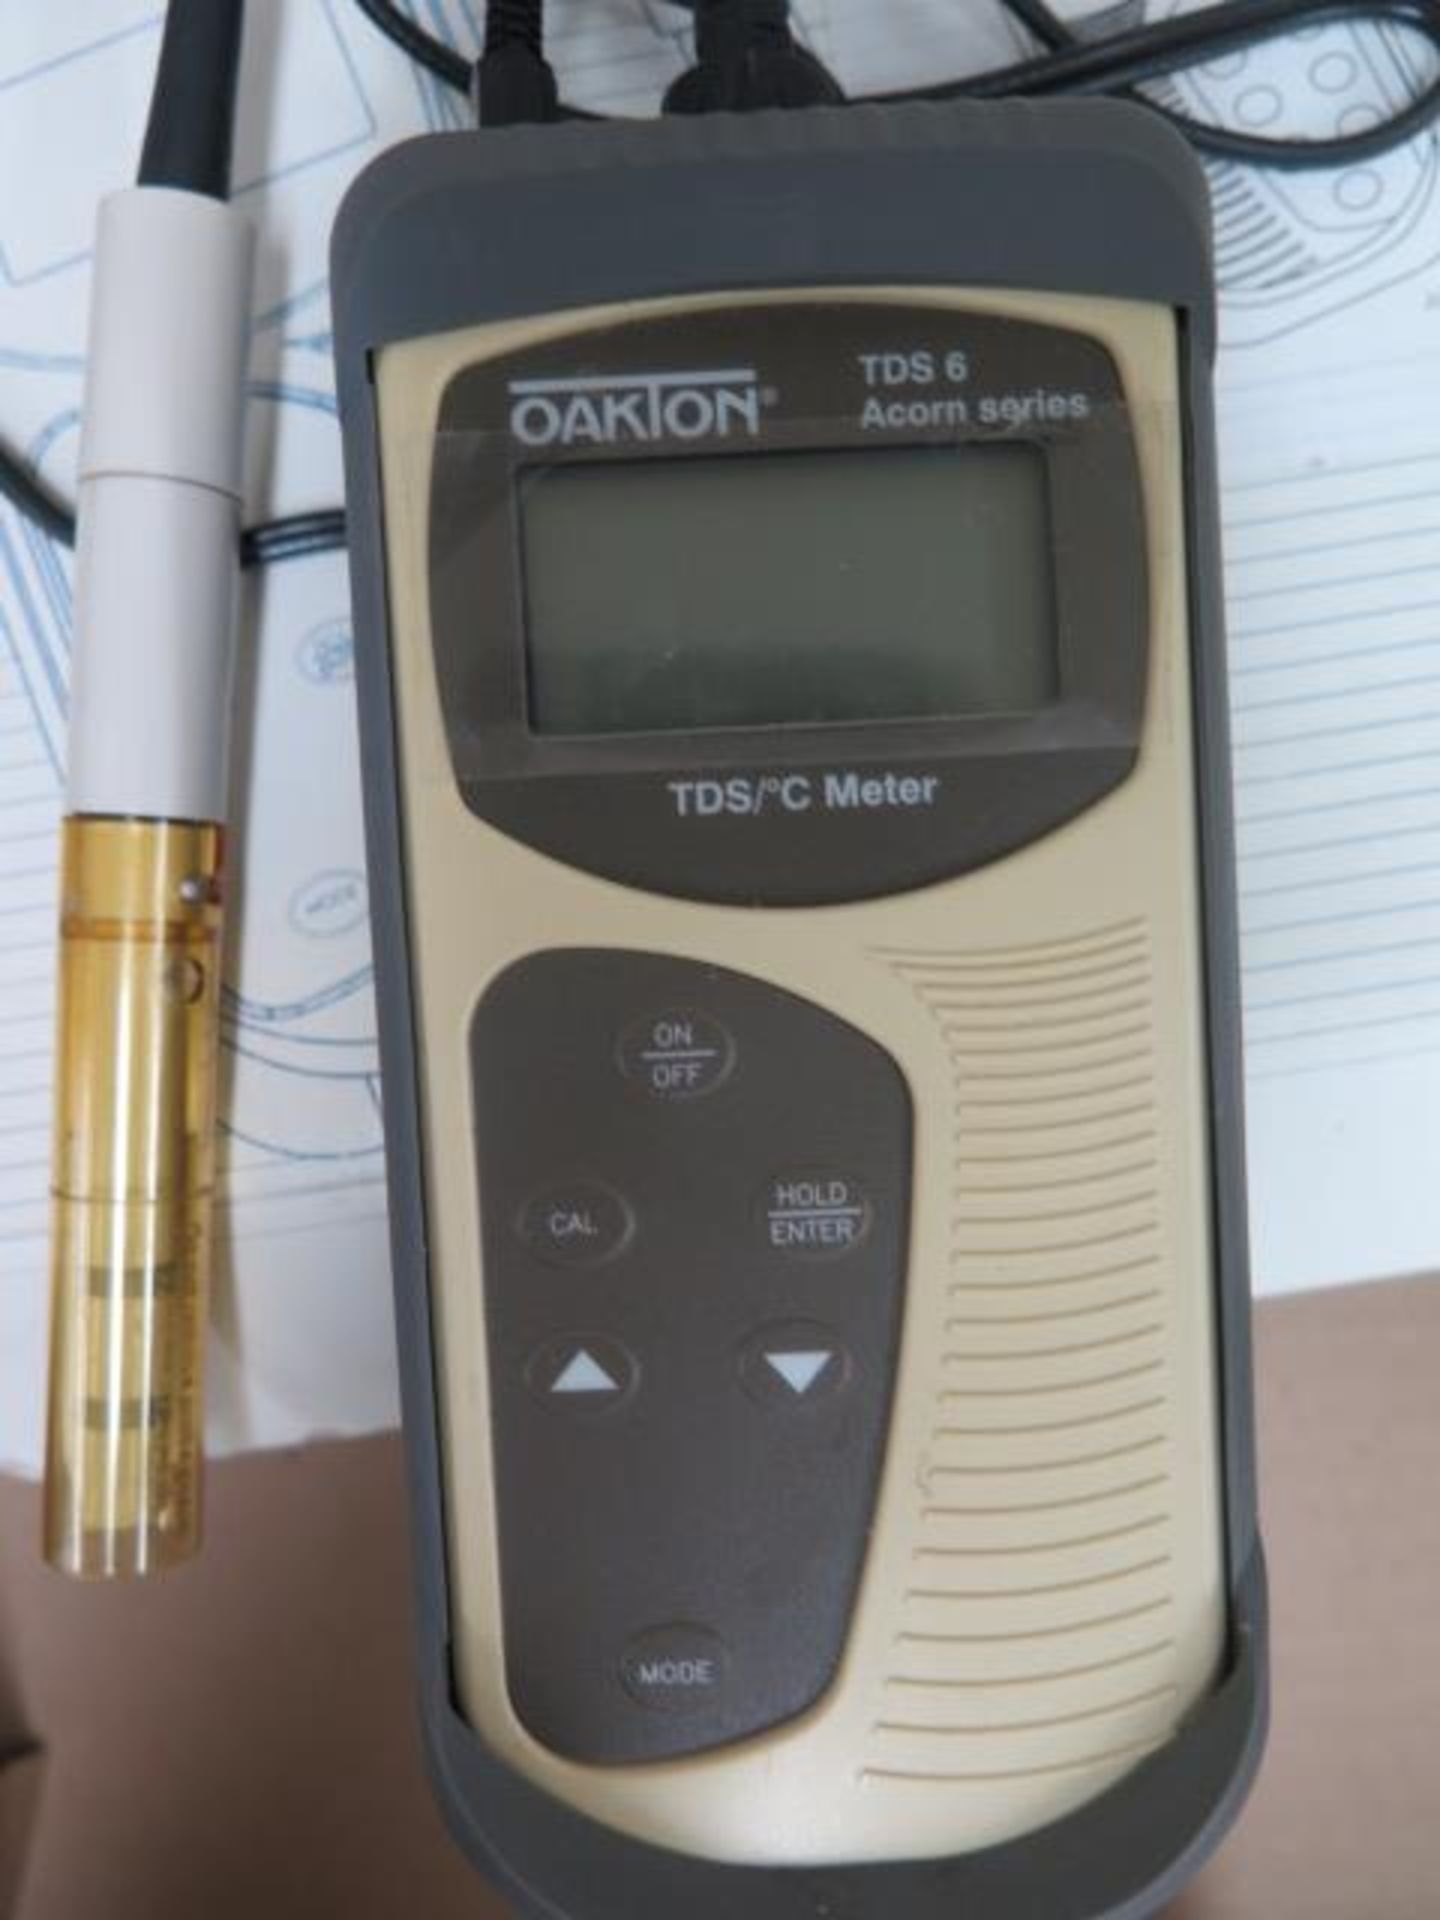 Oakton Acorn Series TDS6 TDS/Degree C Meter (SOLD AS-IS - NO WARRANTY) - Image 4 of 5